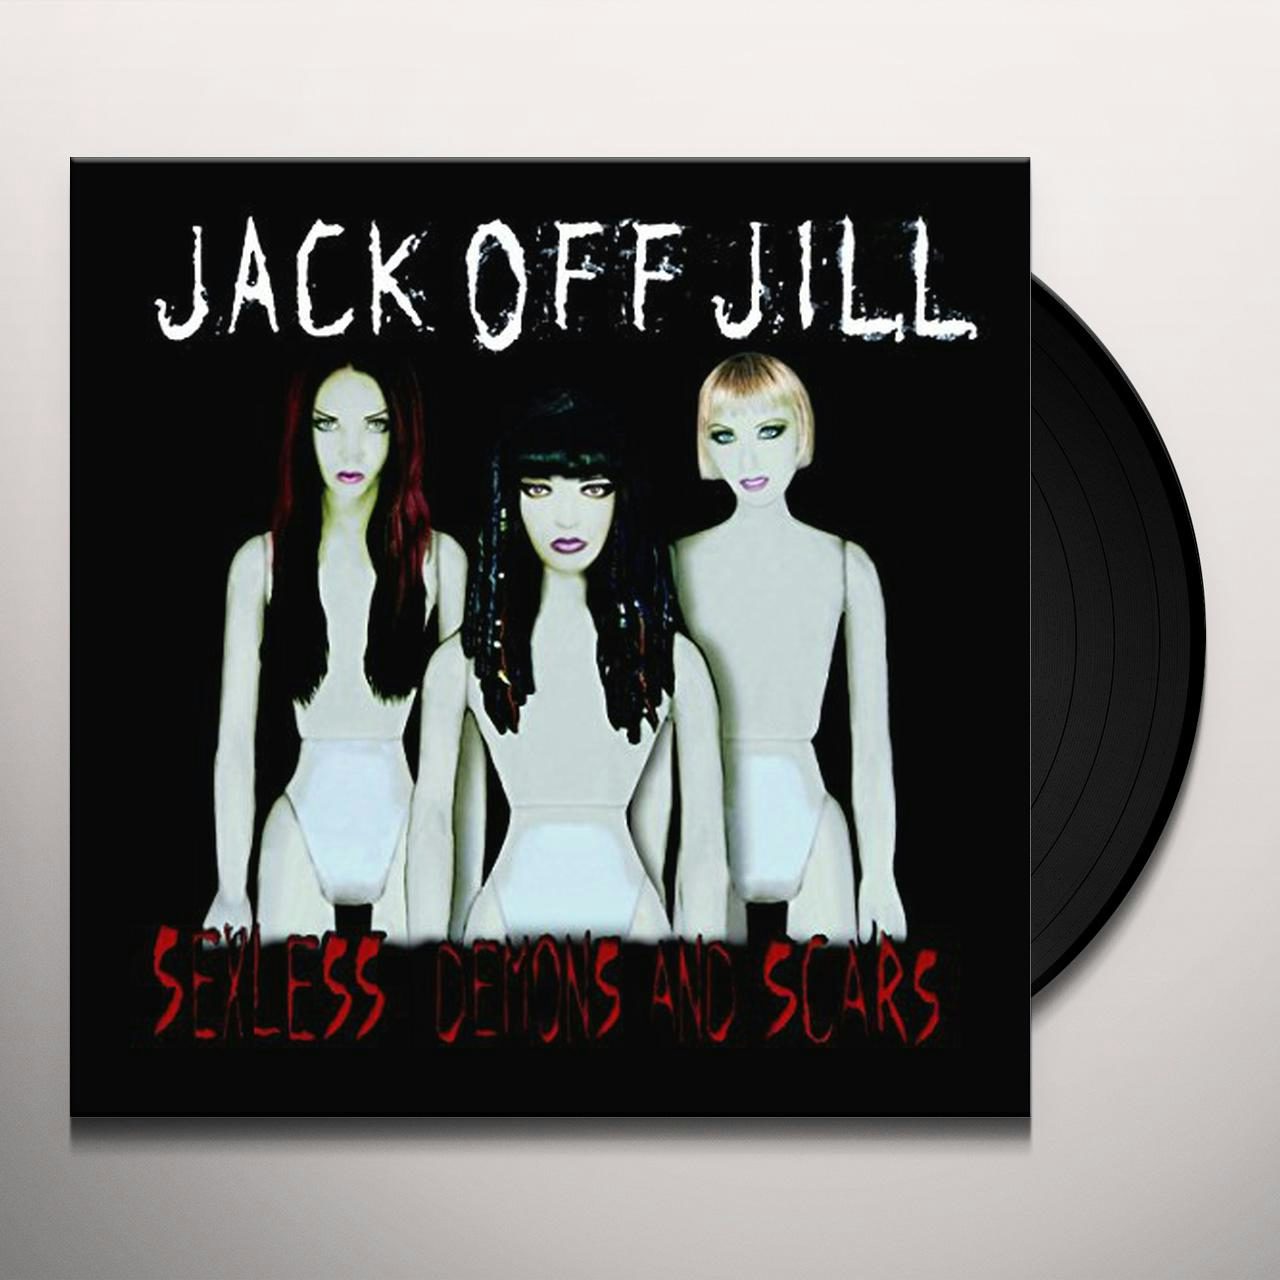 Jack Off Jill / Sexless Demons And Scars